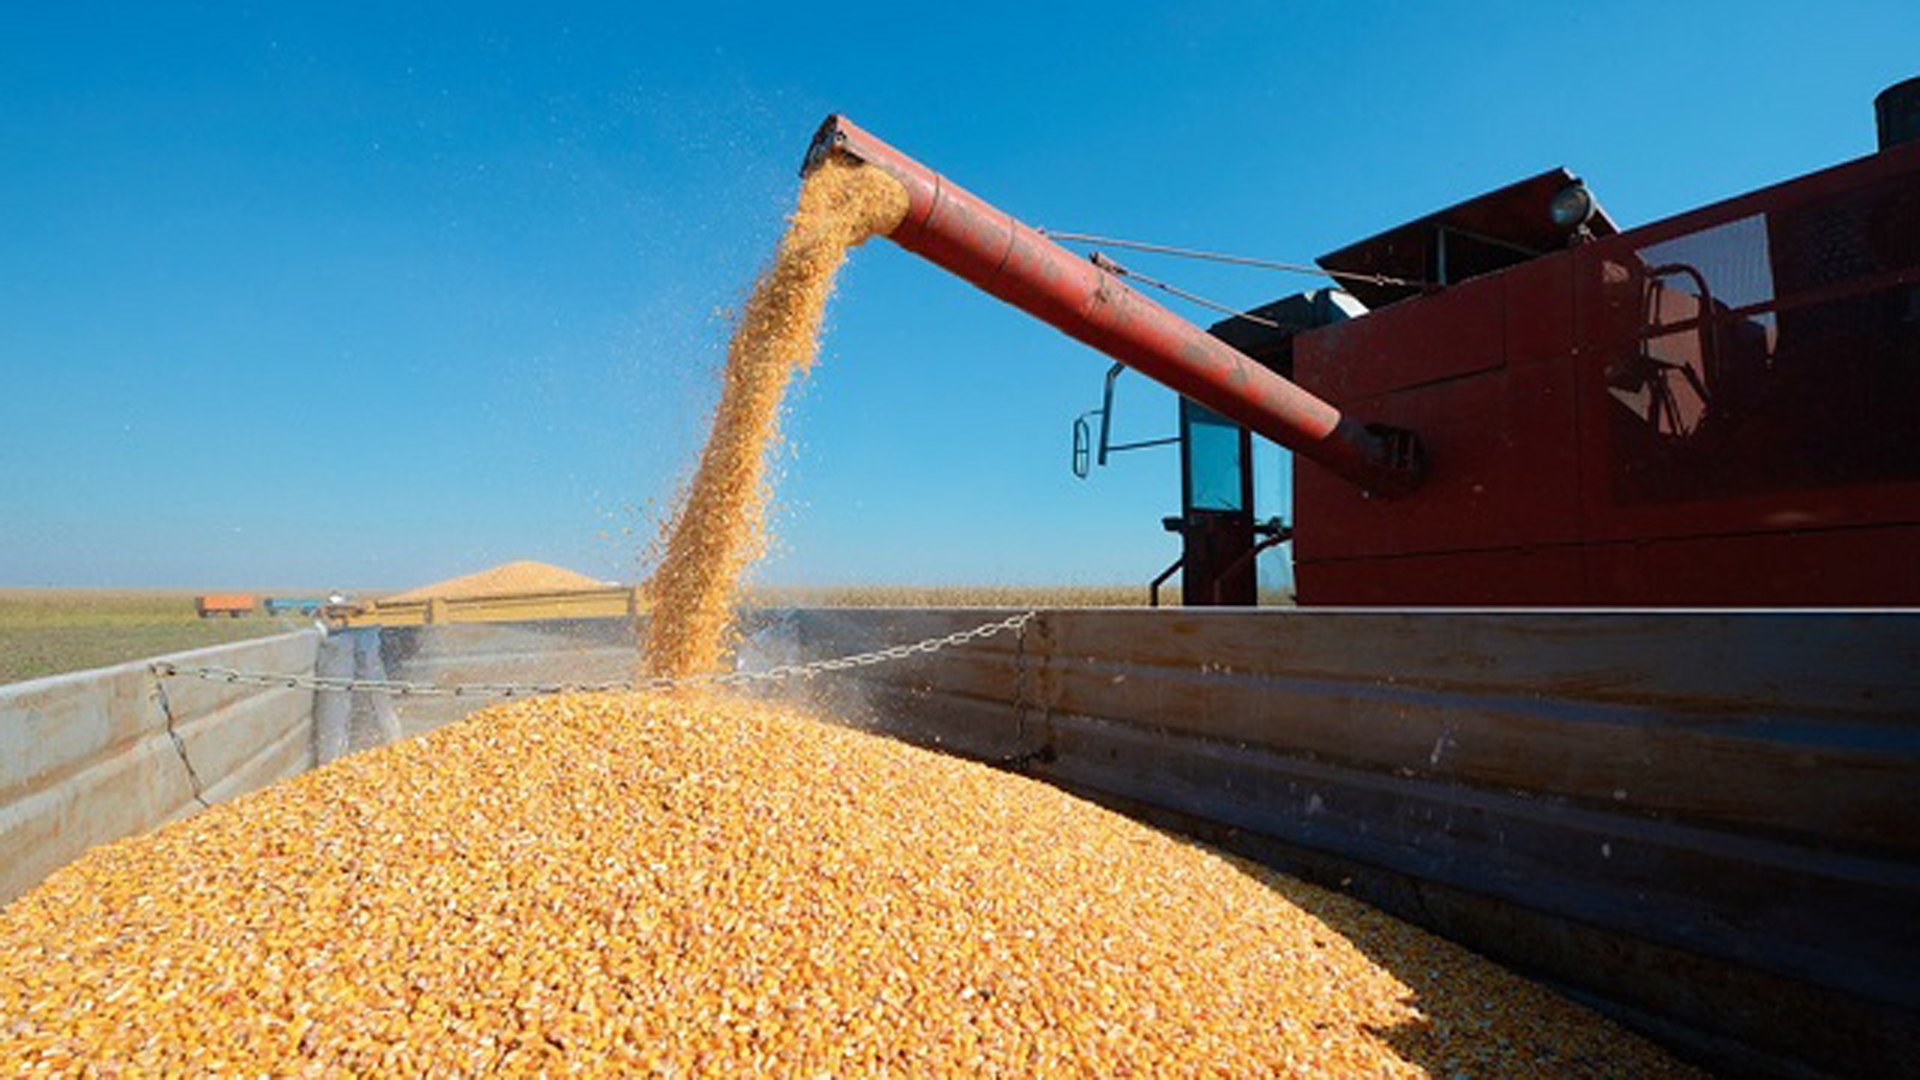 The important supply of grains worldwide comes hand in hand with a large harvest of soybeans and corn in Brazil 